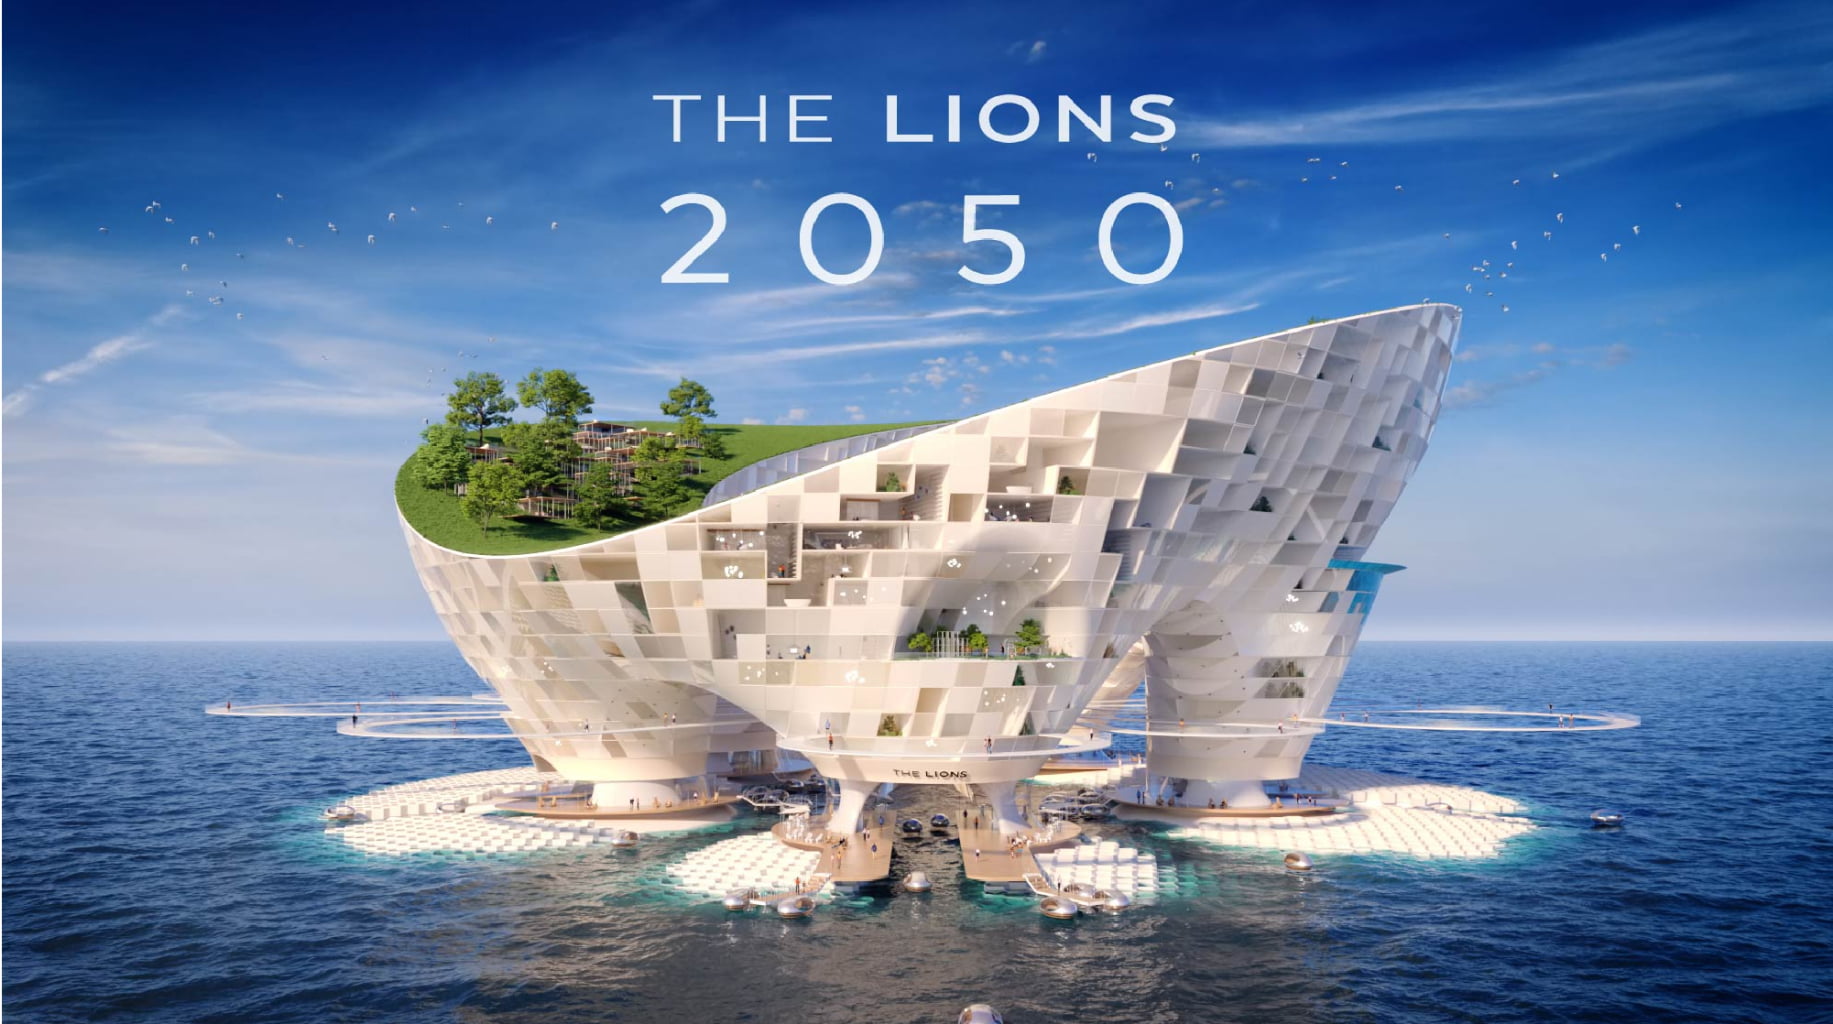 THE LIONS 2050 PROJECT